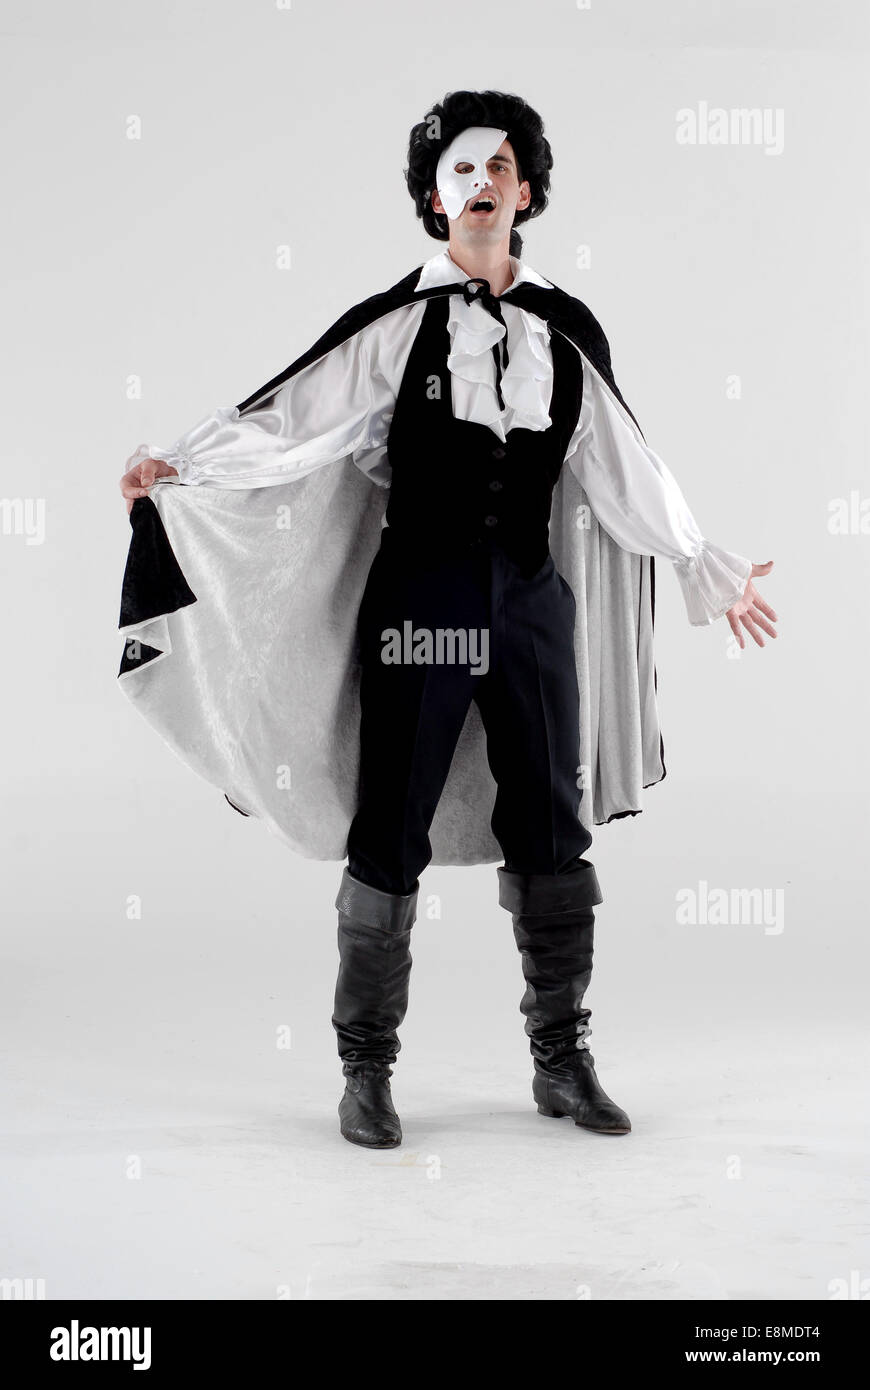 man in fancy dress comedy costume as the phantom of the opera from the musical, with mask, cape and full outfit Stock Photo